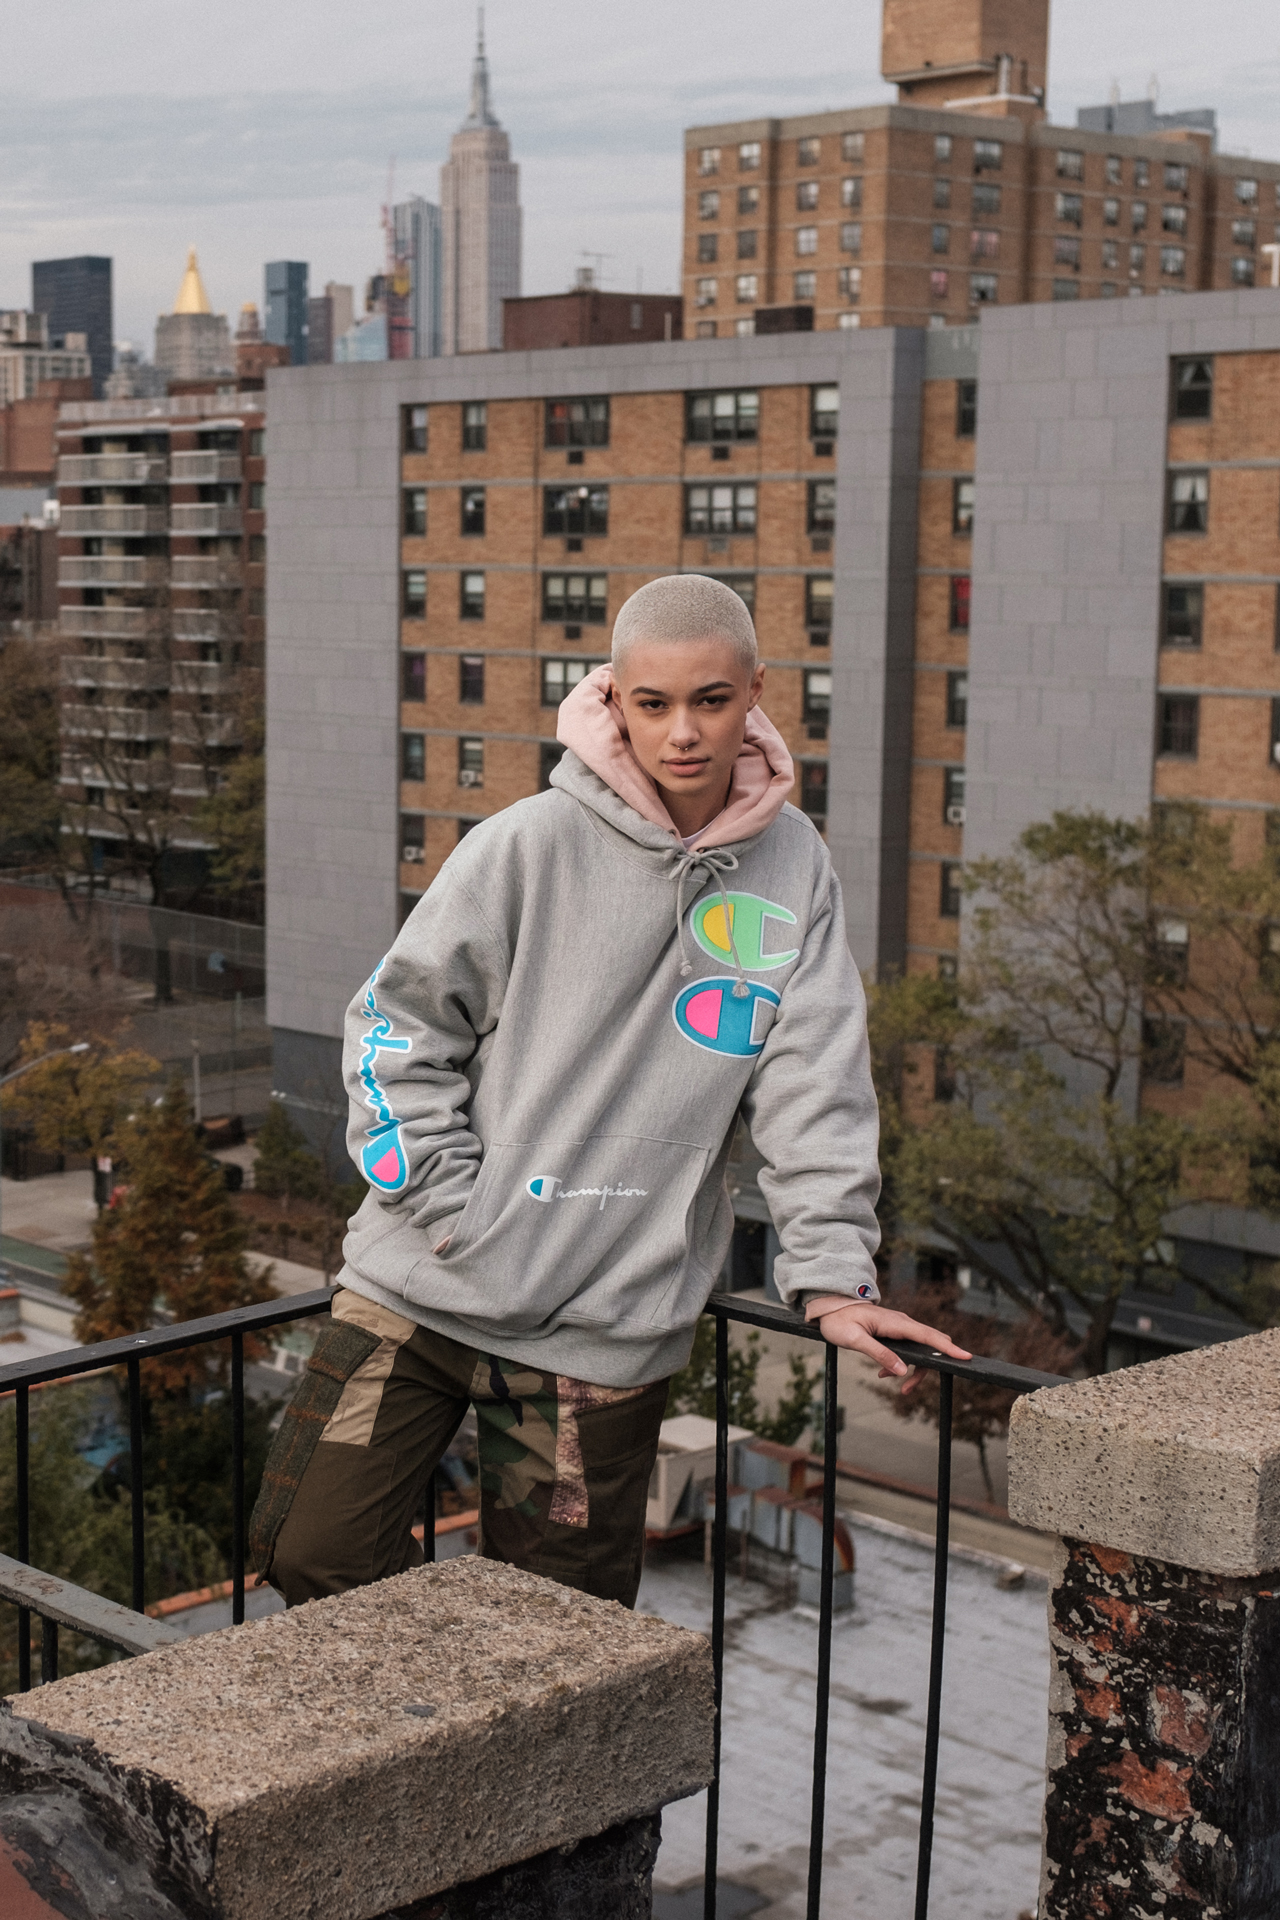 https://hypebeast.com/image/2019/11/champion-delivering-black-friday-amazon-lookbook-collection-1.jpg